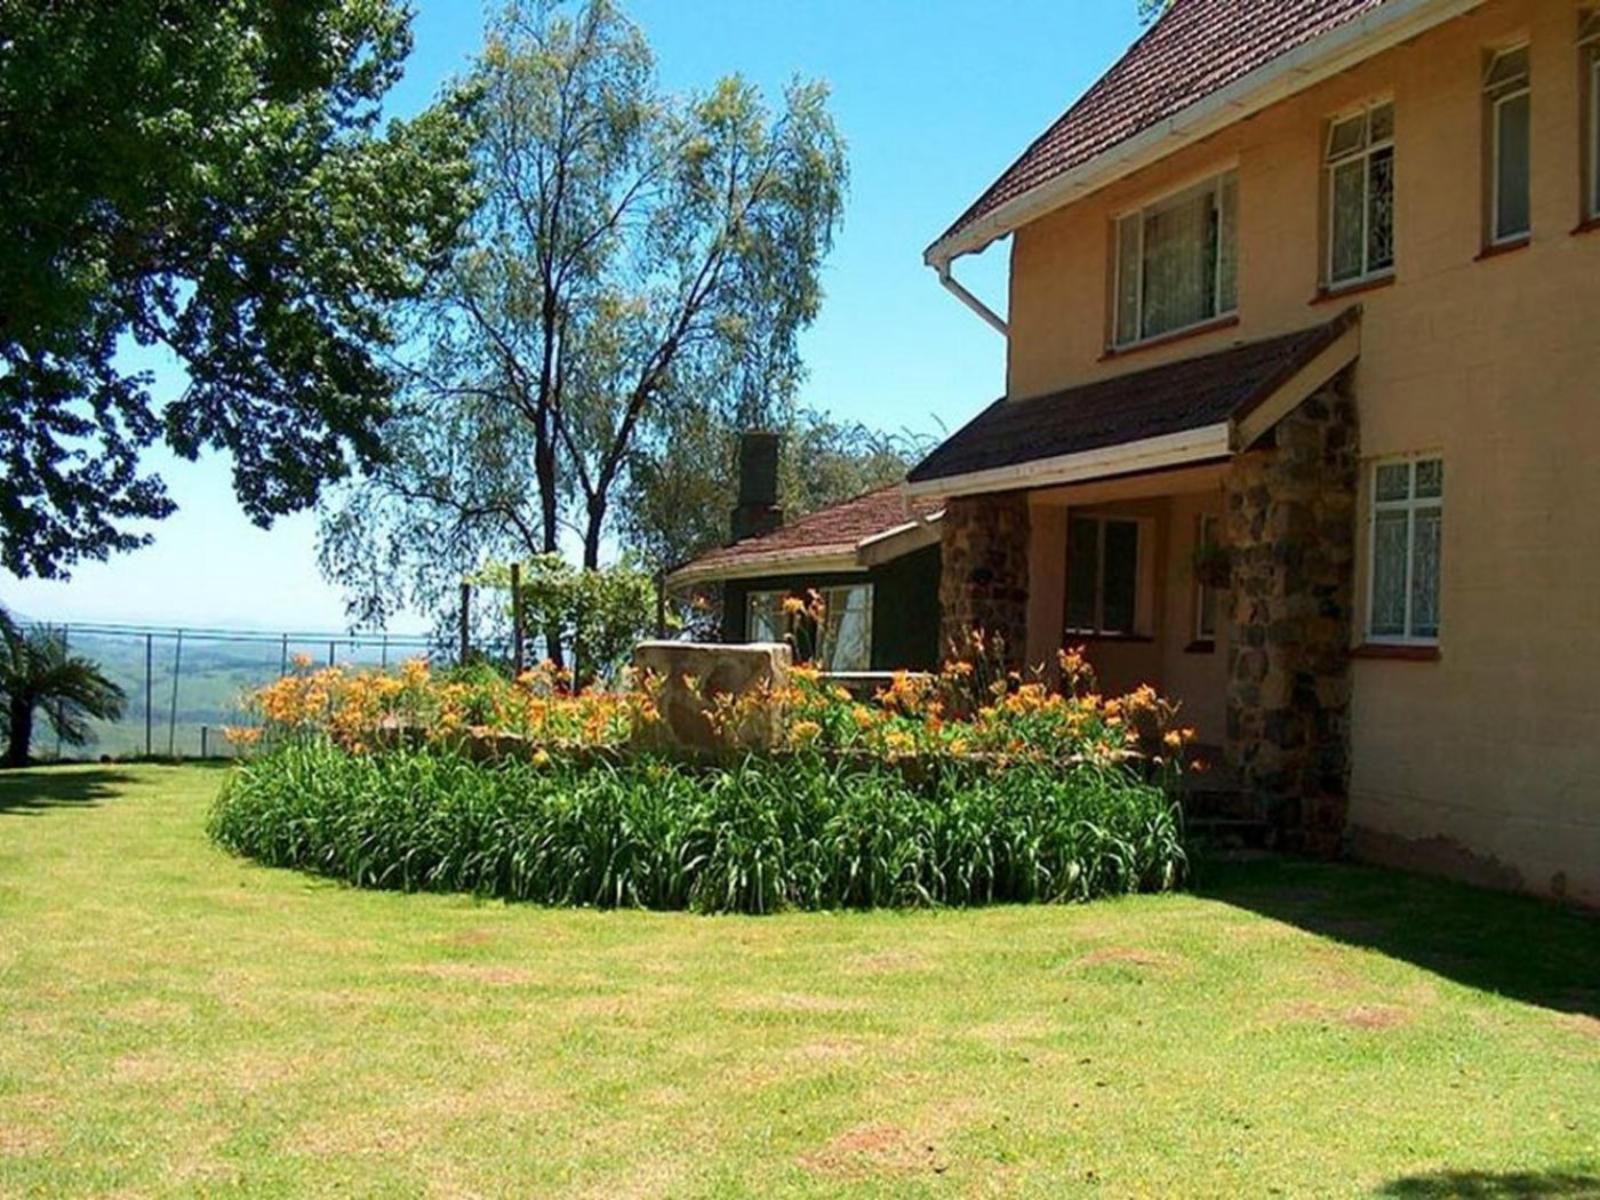 Ondini Guest House Champagne Valley Kwazulu Natal South Africa House, Building, Architecture, Garden, Nature, Plant